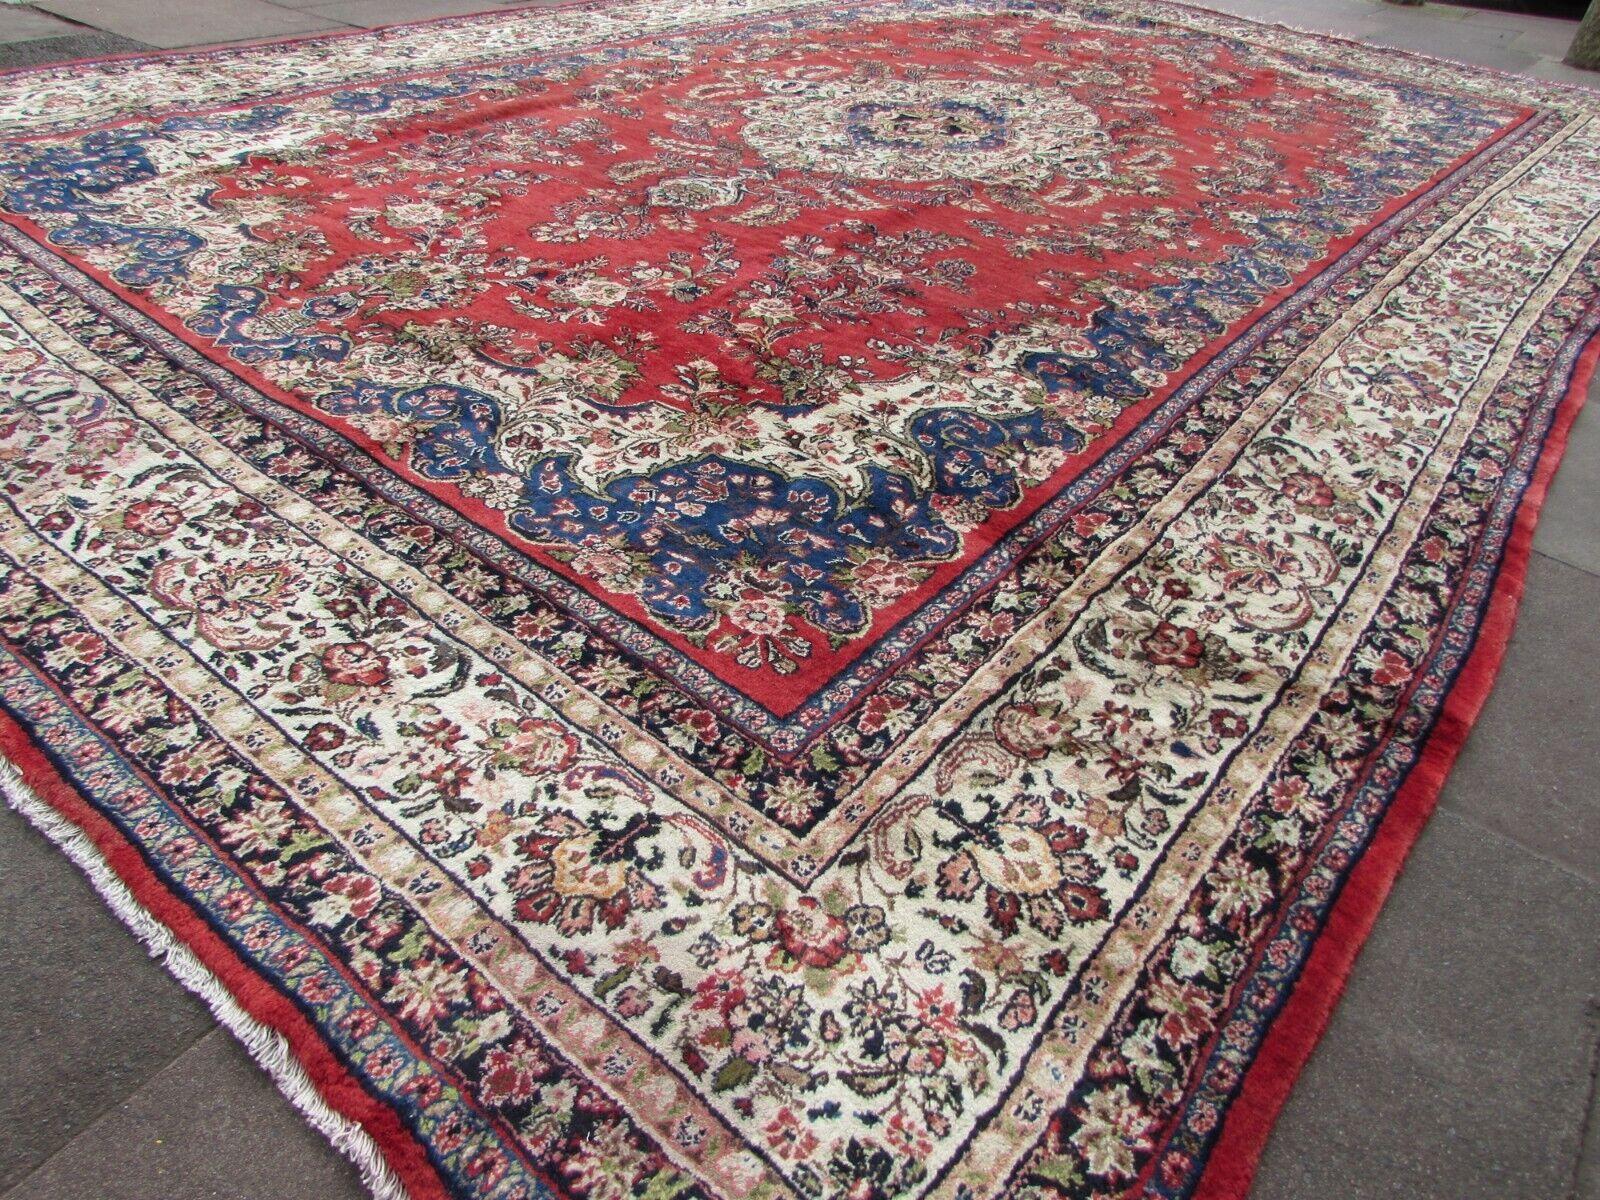 Elevate the grandeur of your living space with this Handmade Vintage Persian Style Sarouk Red Rug, a true masterpiece that exudes opulence and elegance. Crafted in the 1970s, this oversize, palace-size rug in striking red color and good condition is